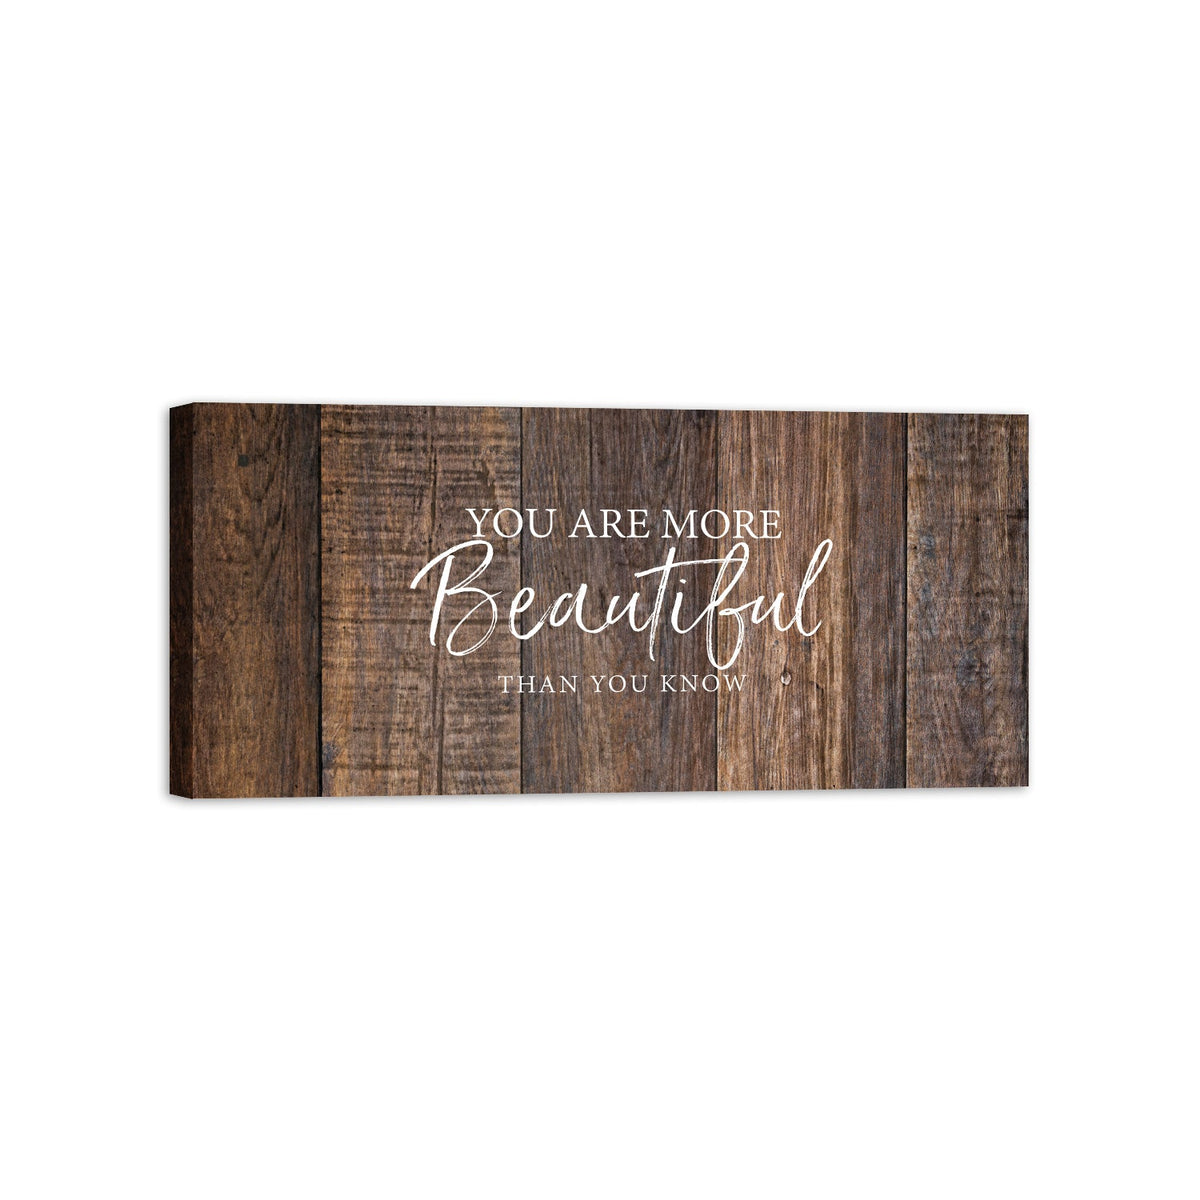 Every Love Story is Beautiful Inspirational Canvas Wall Art Framed Modern Wall Decor Decorative Accents For Walls Ready to Hang for Home Living Room Bedroom Entryway Kitchen Office Size 16” x 5.5” - LifeSong Milestones